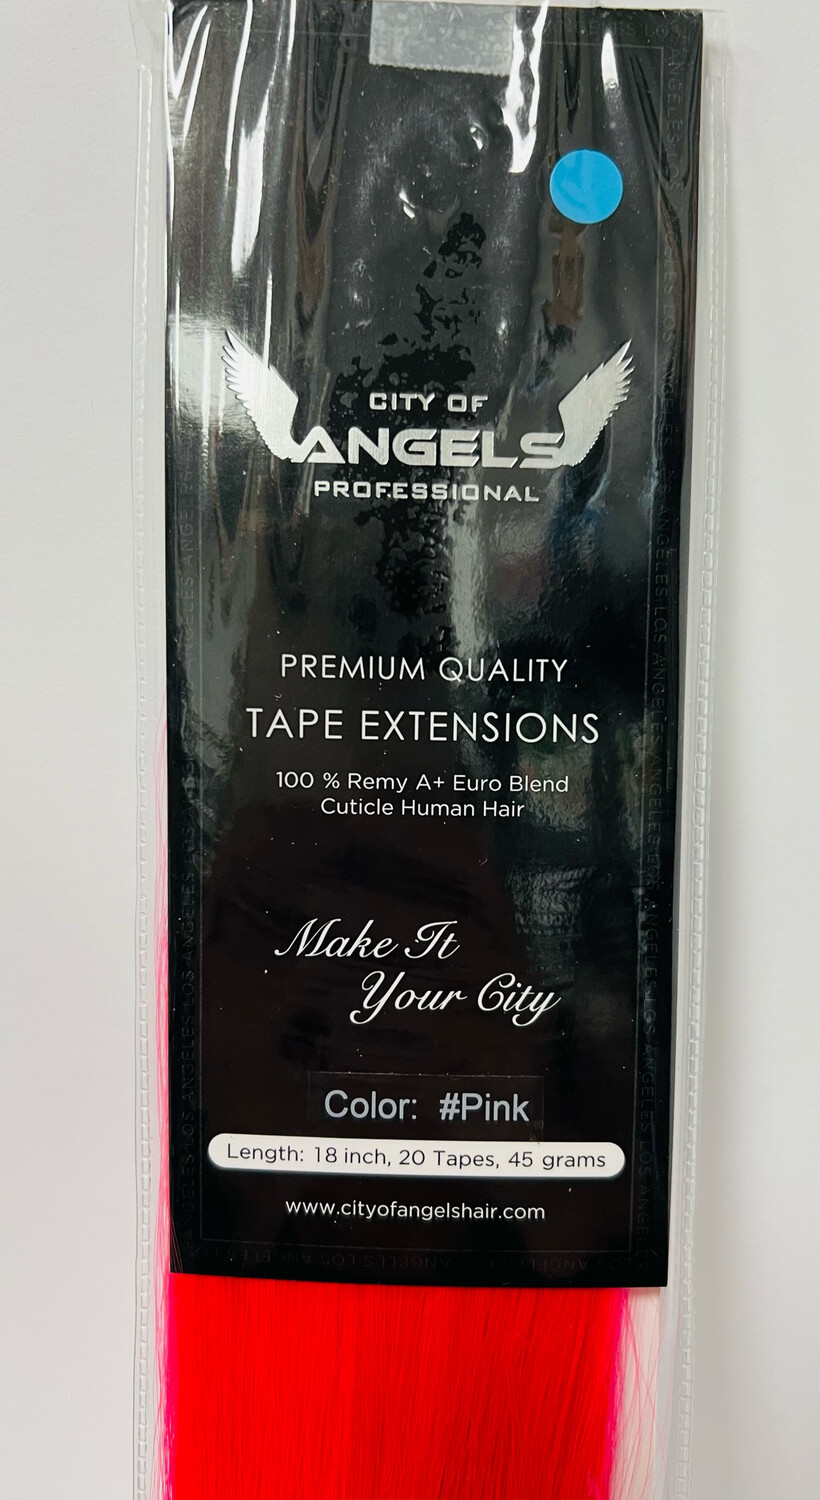 #Pink 18" Tape Extensions